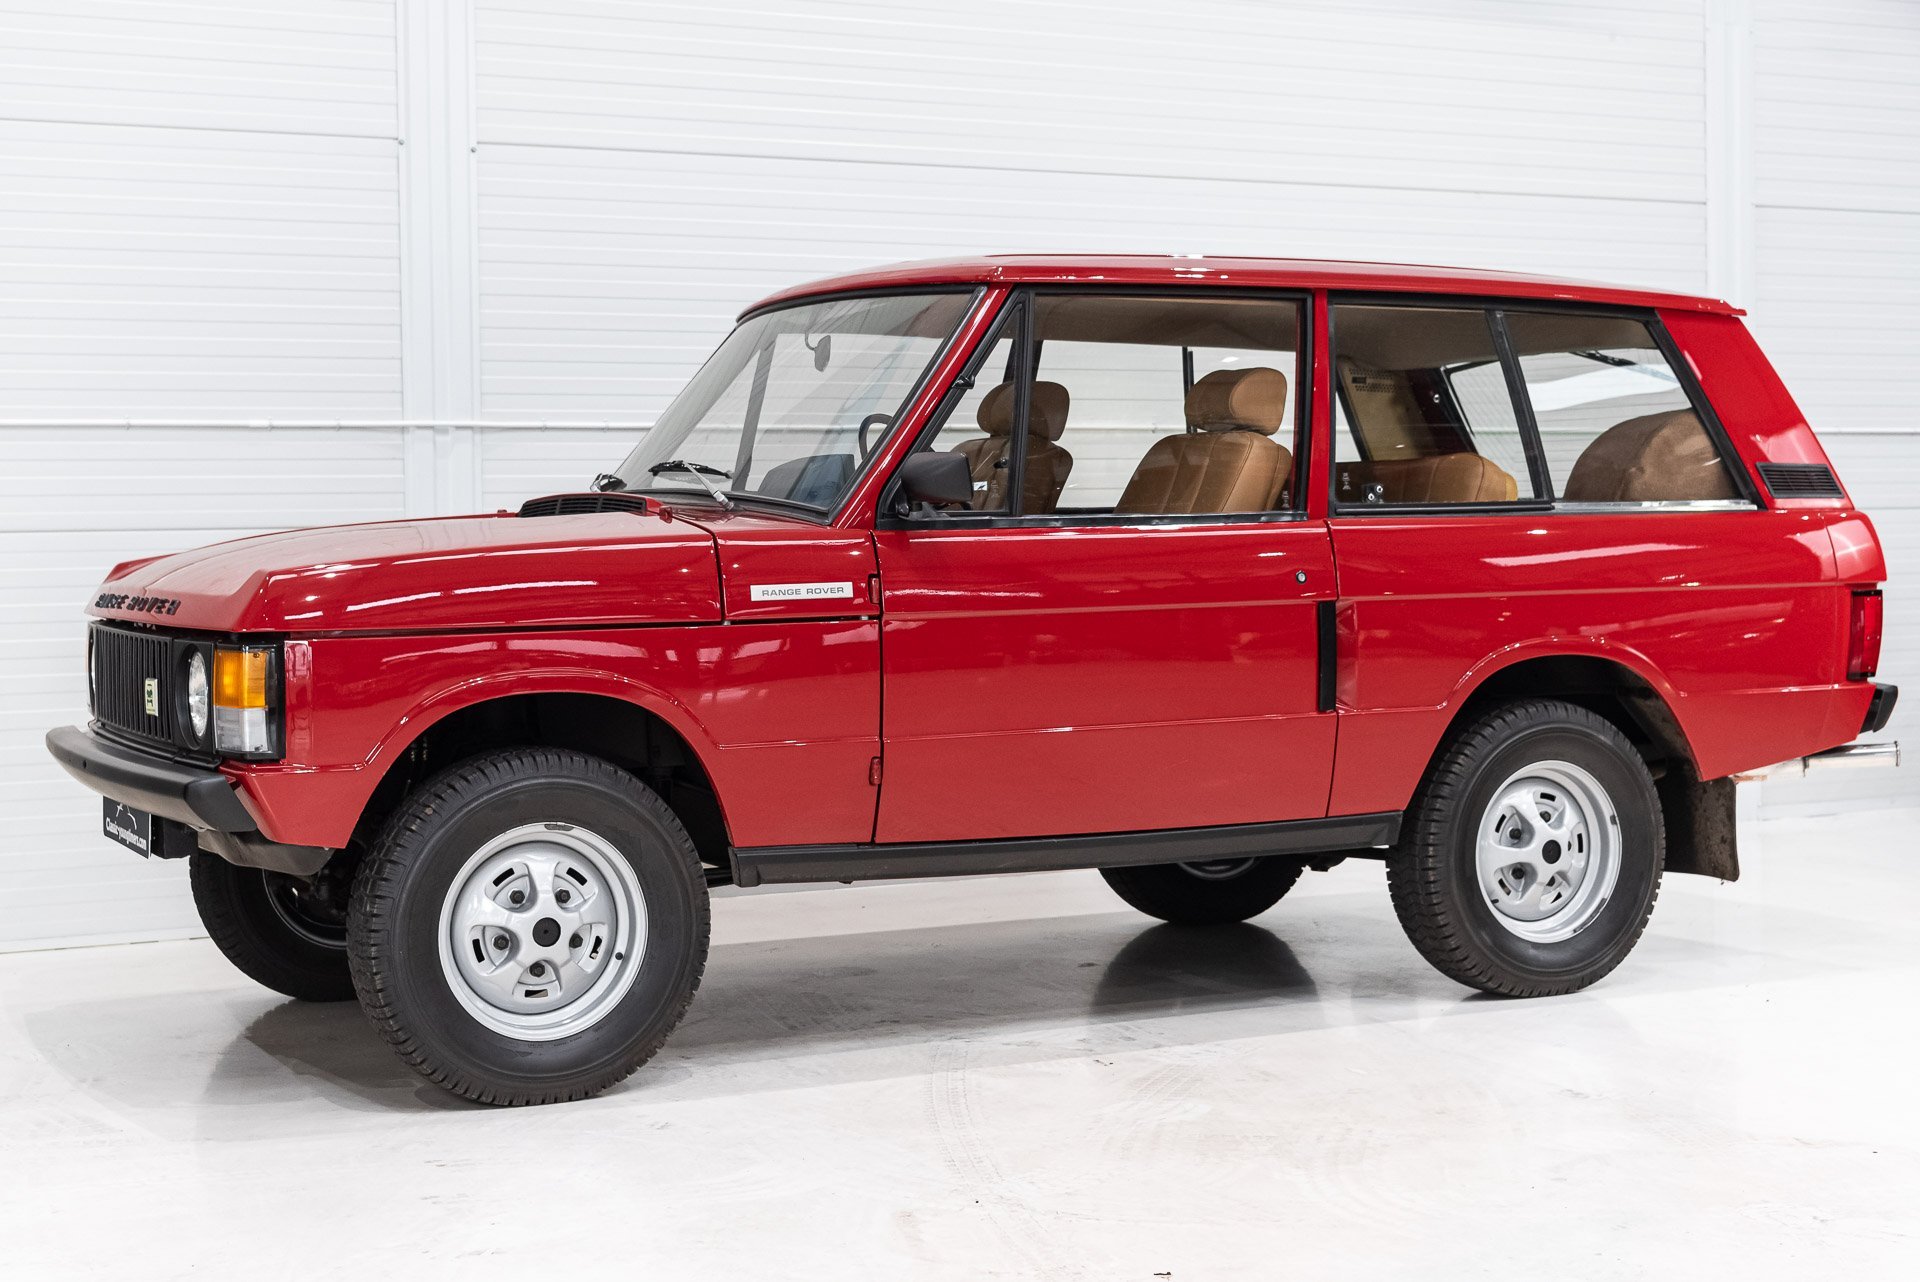 doden Anekdote Specialiteit 1974 Land Rover Range Rover - Classic Coupe 3.5 V8 | Classic Driver Market